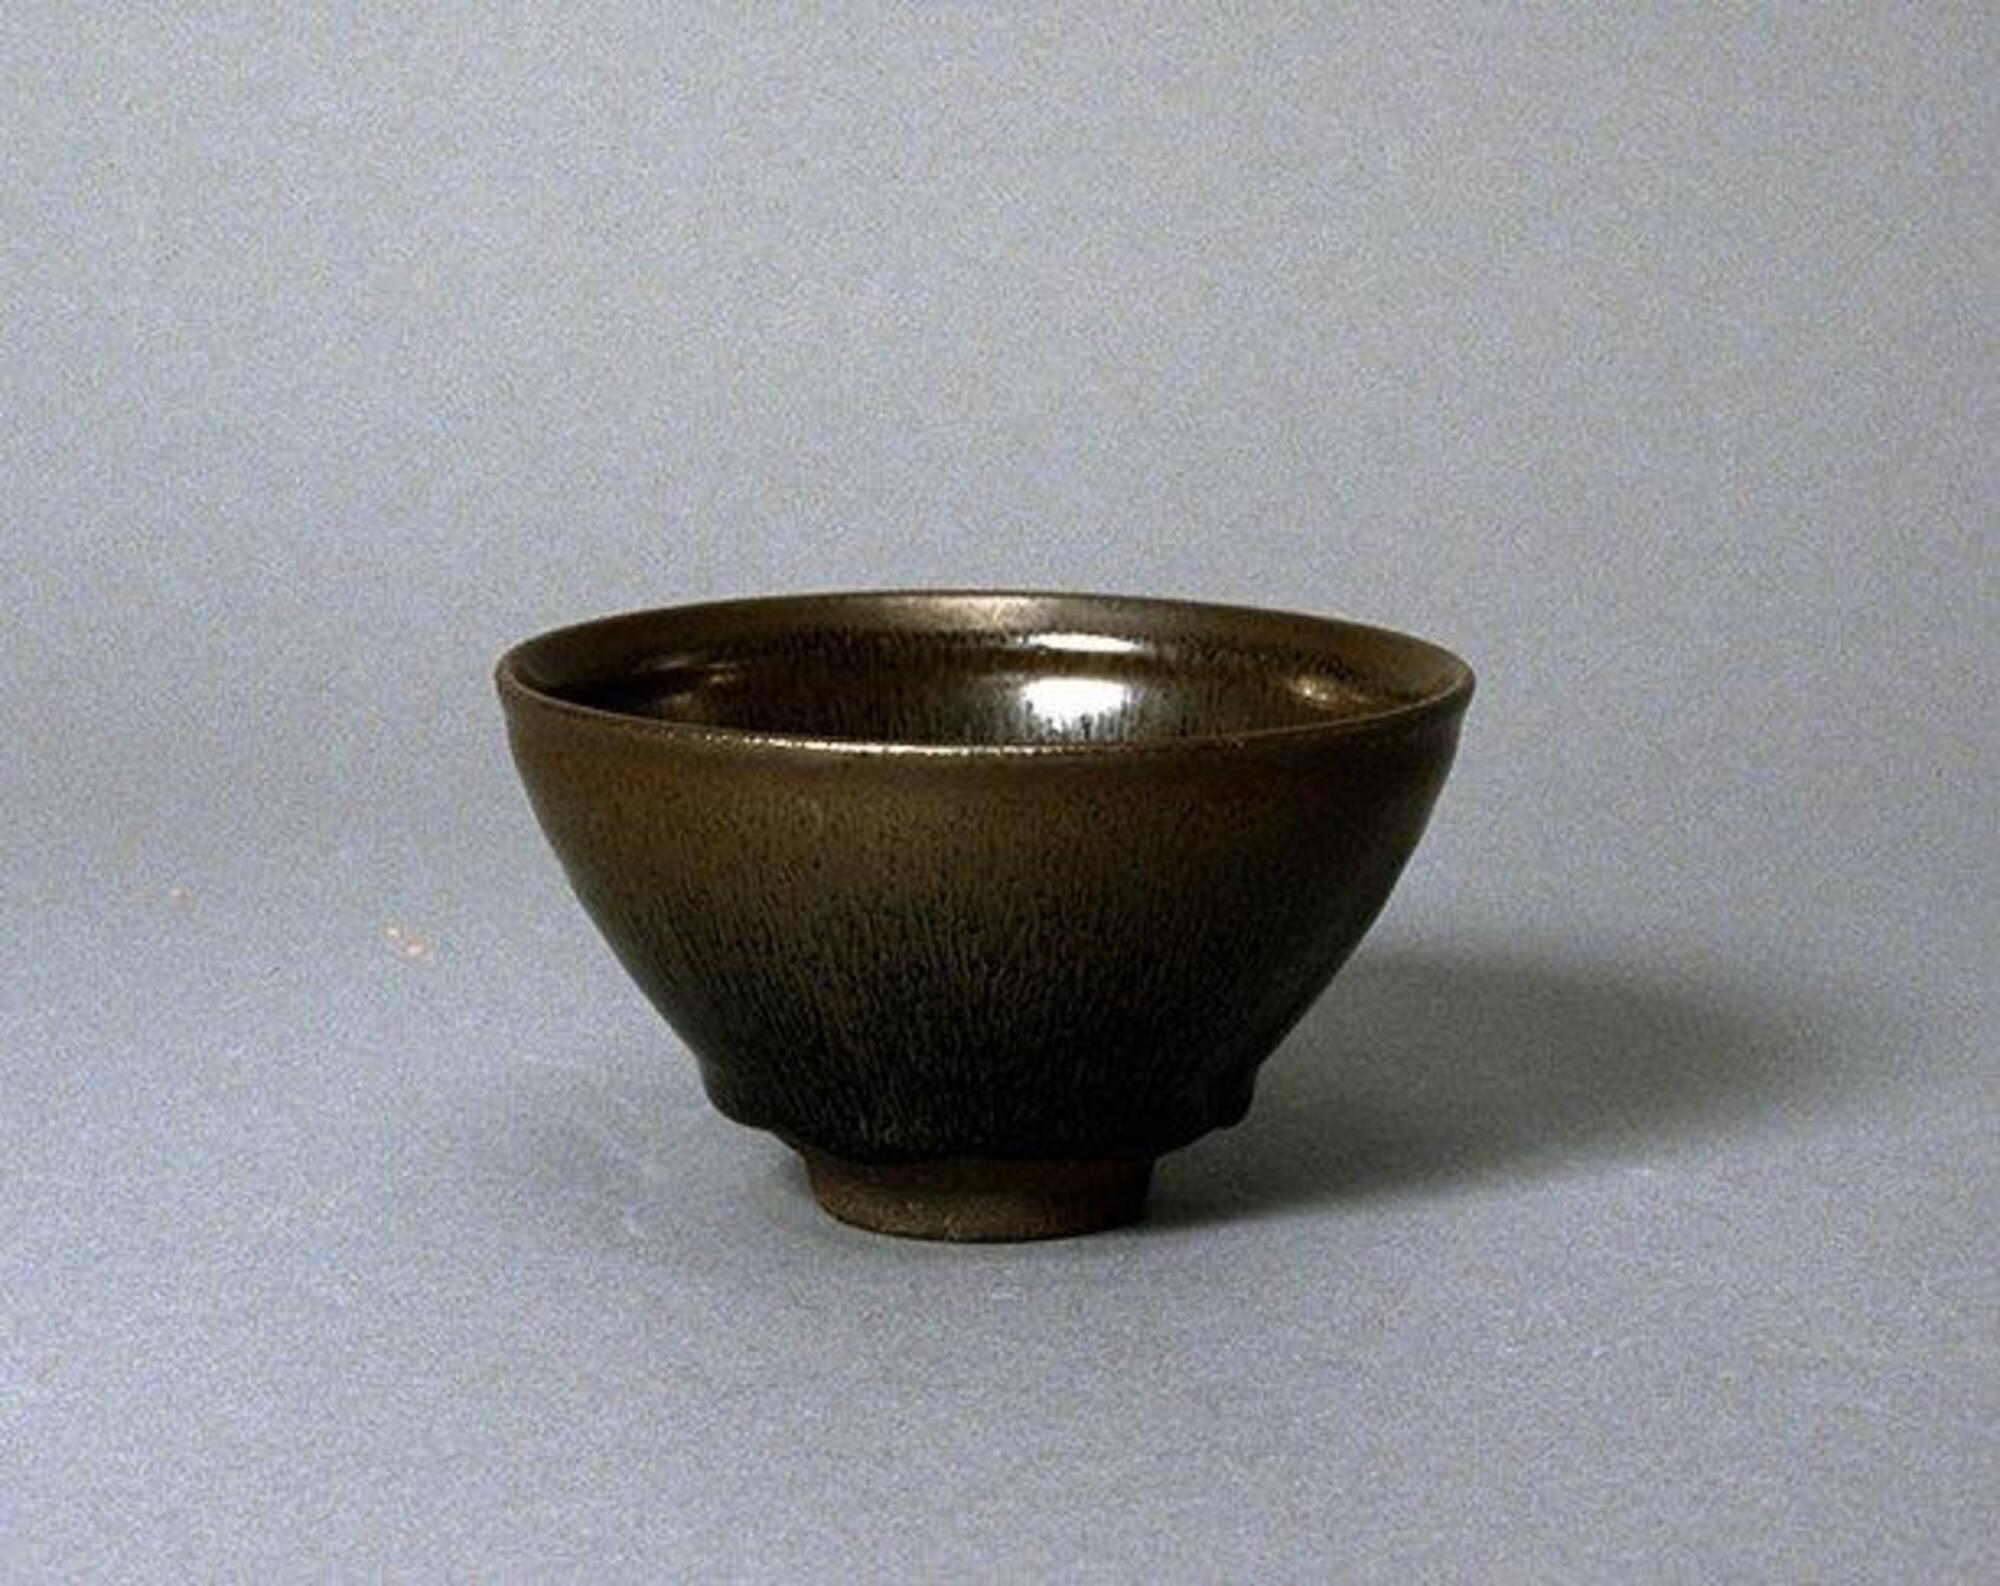 A deep, conical bowl on a straight foot ring and with subtle rim articulation, covered in a thickly applied dark iron-rich black glaze with lighter russet-brown and iridescent hare's fur (兔毫盏 <em>tuhao zhan</em>) markings.  The thick glaze thins at the rim to a russet-brown color.